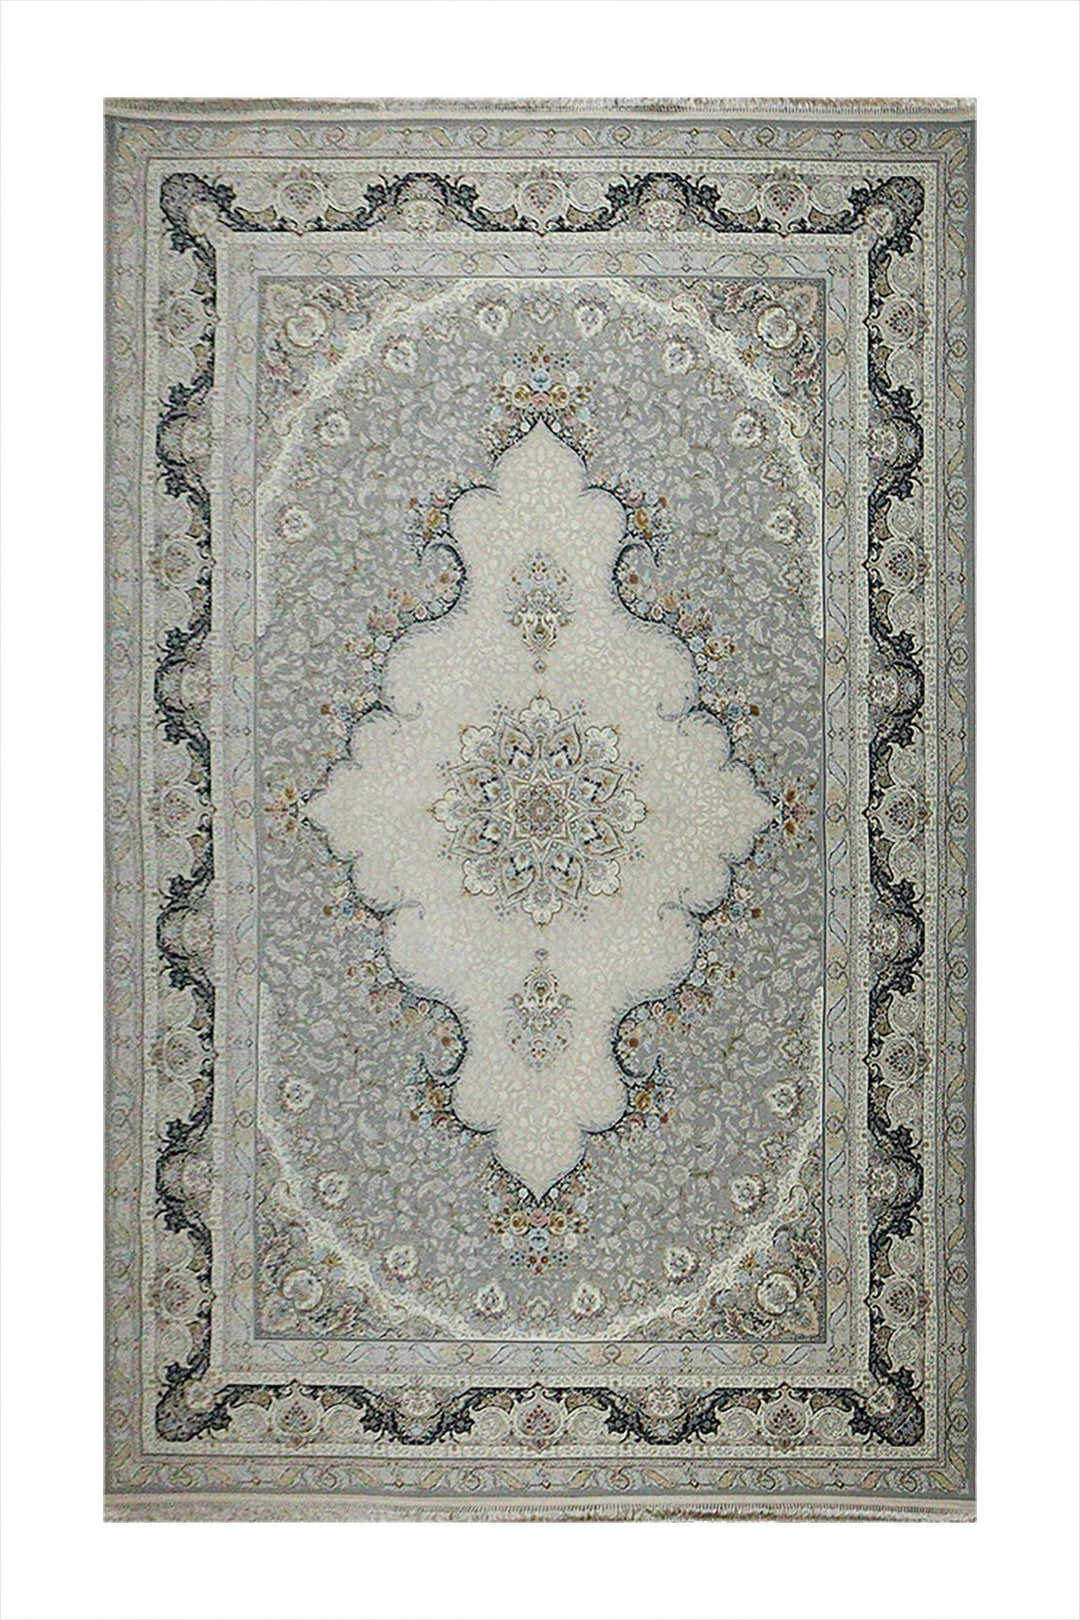 Iranian Premium Quality Authentic 1500 Rug - 6.5 x 9.8 FT - Gray - Resilient Construction for Long-Lasting Use - V Surfaces